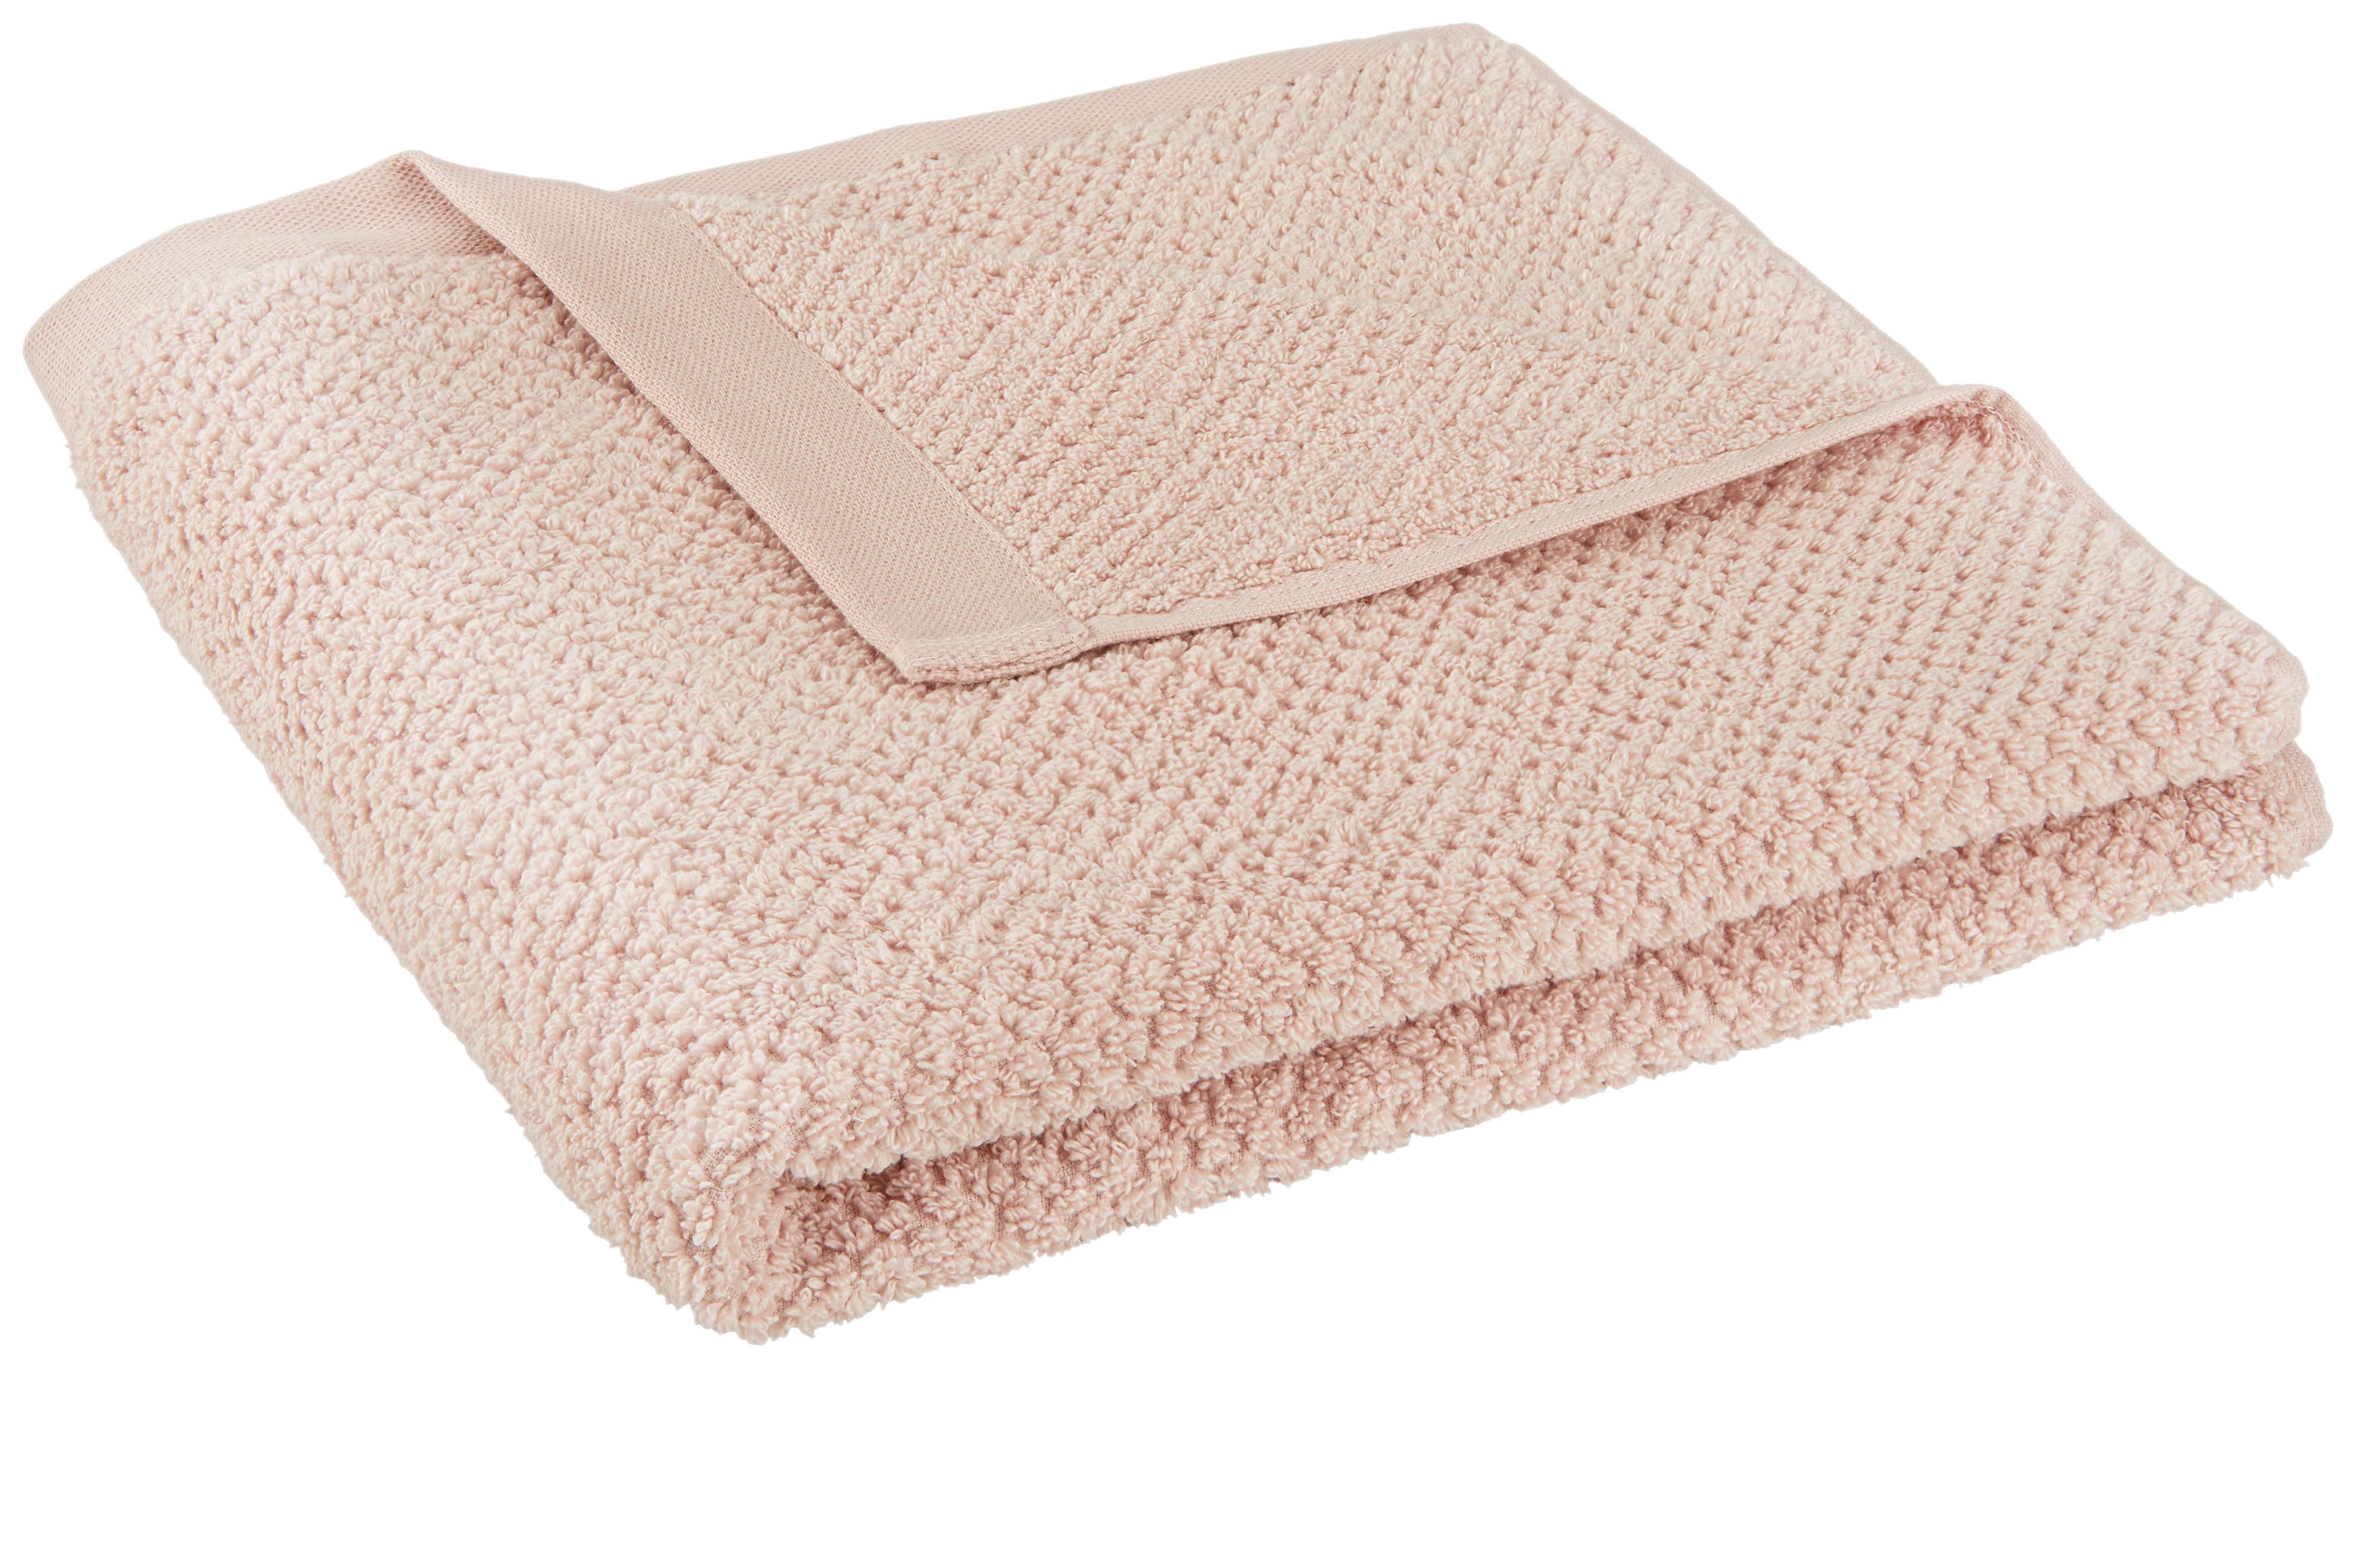 Duschtuch Luise in Rosa ca. 70x140cm - Rosa, KONVENTIONELL, Textil (70/140cm) - Modern Living